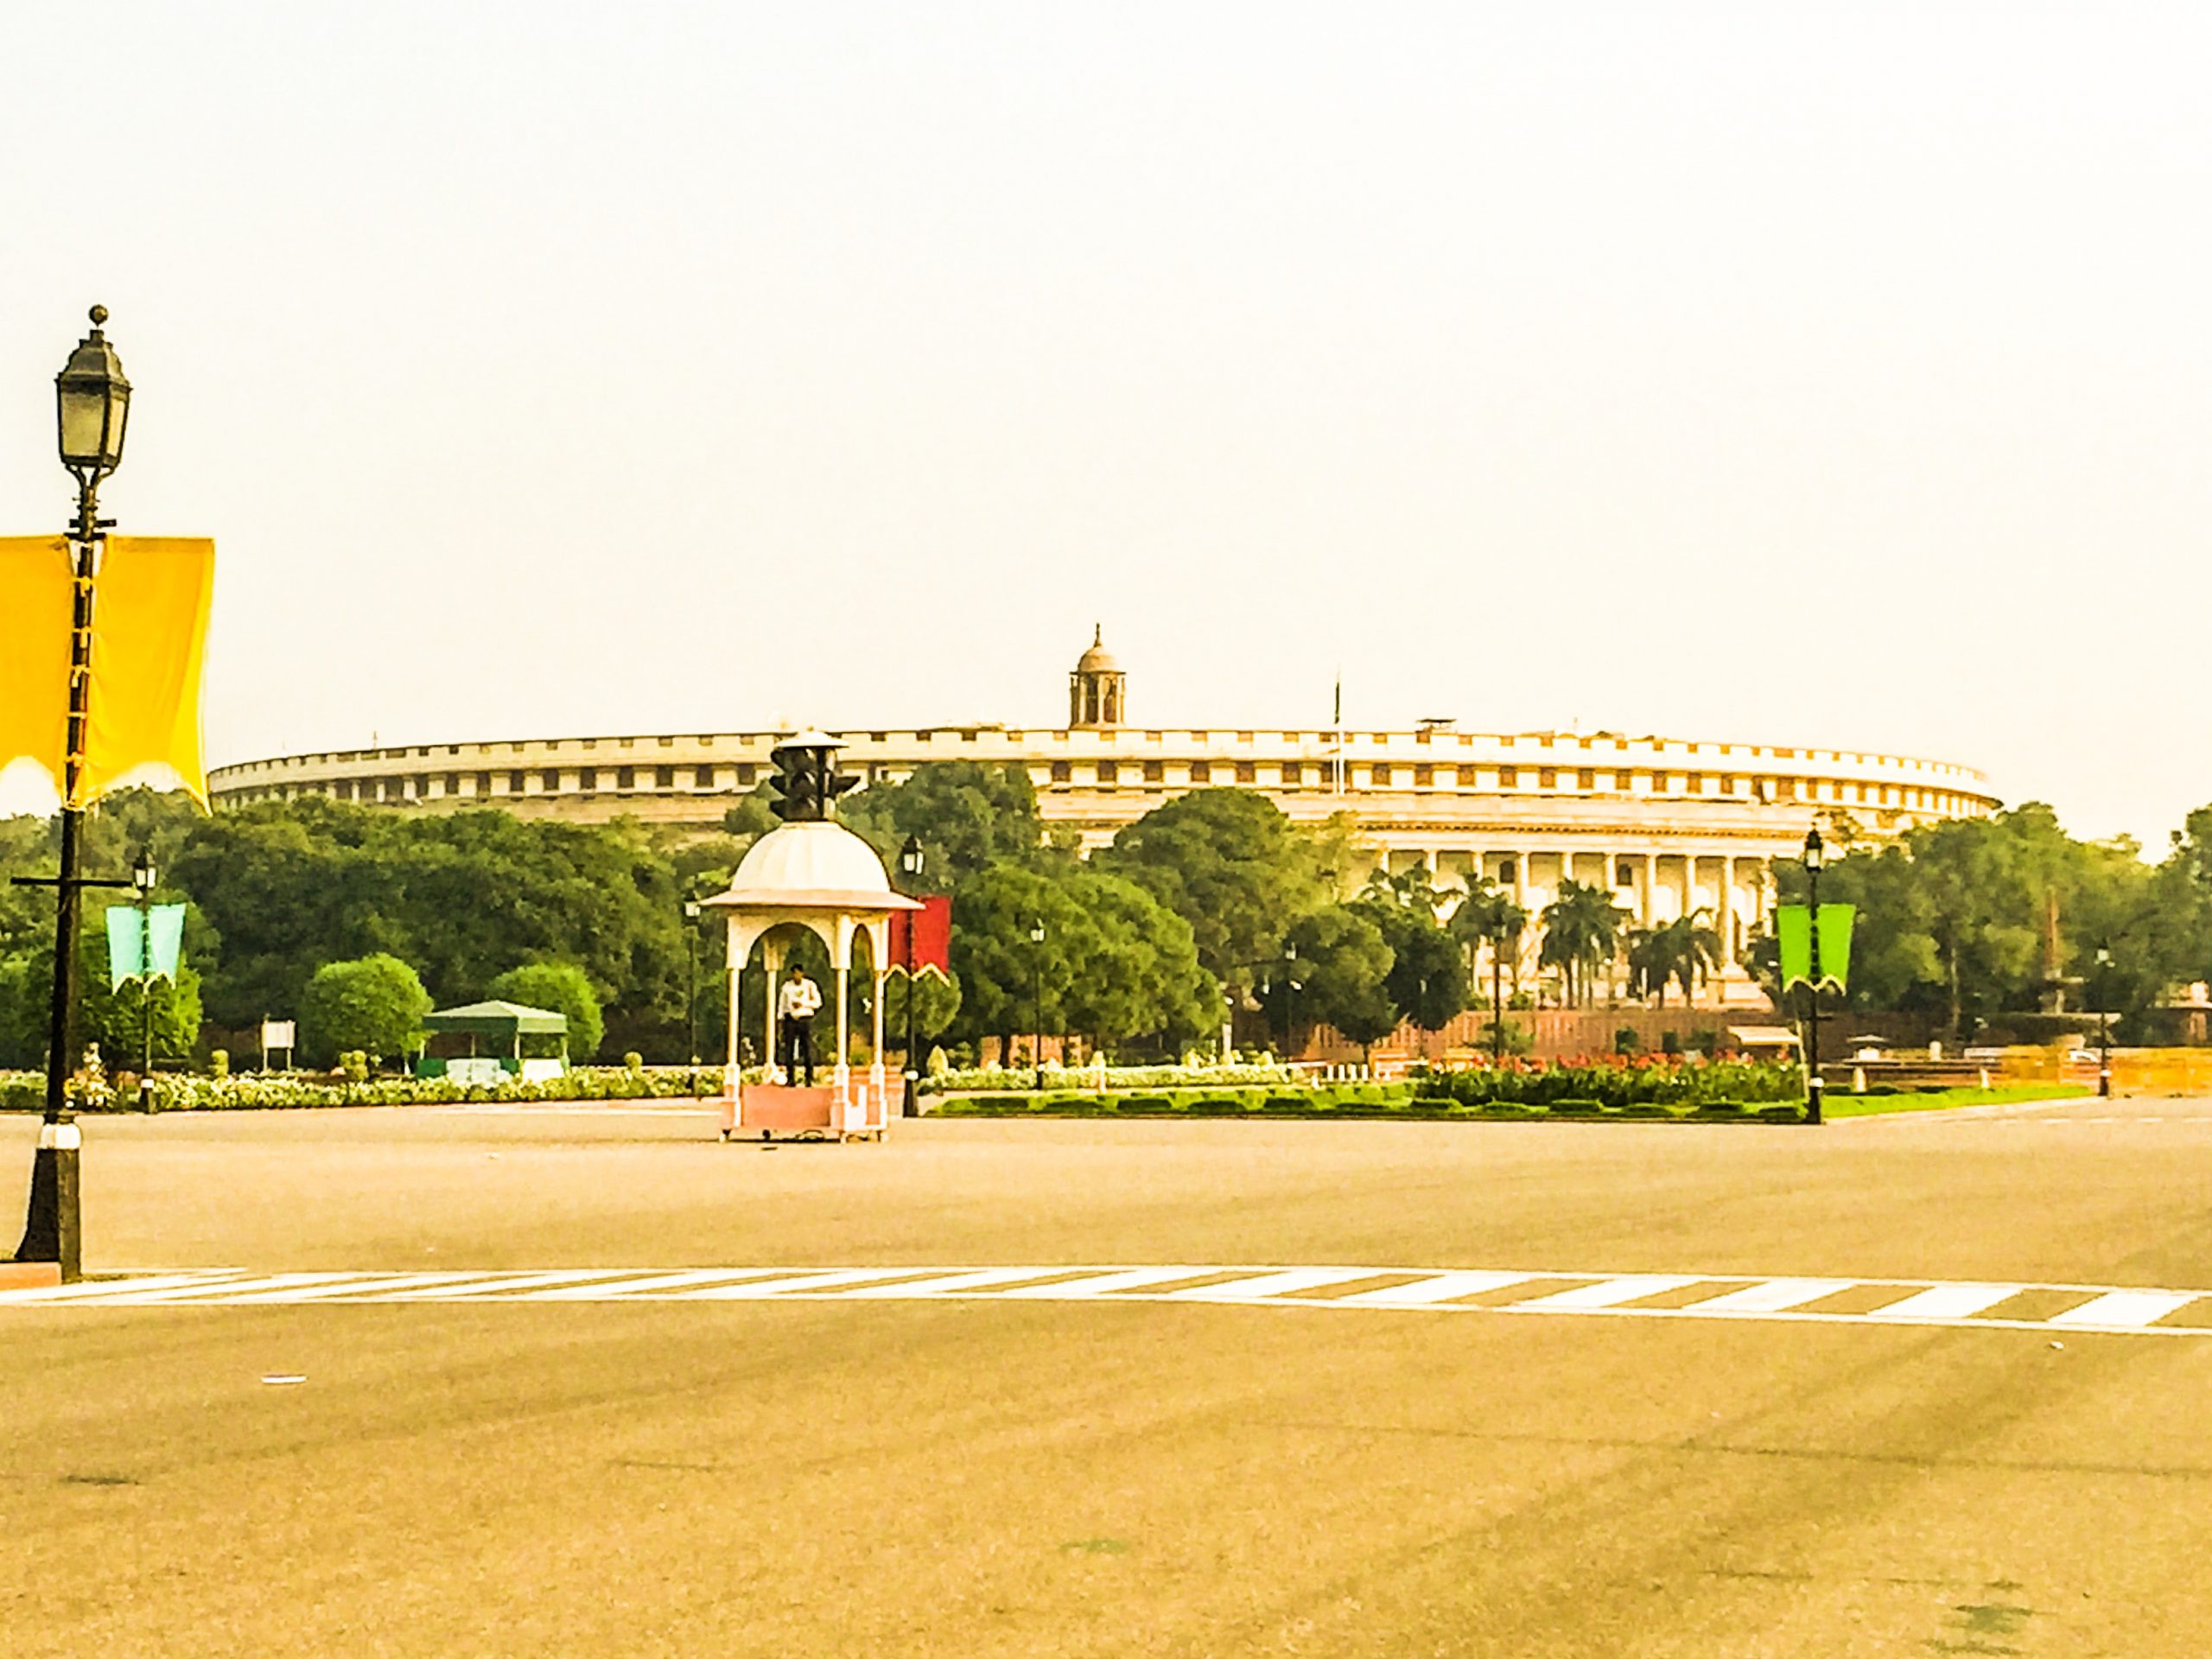 Indian parliament BhavanPicture of the parliament-women in policy making-Photo Courtesy: Wikimedia Commons